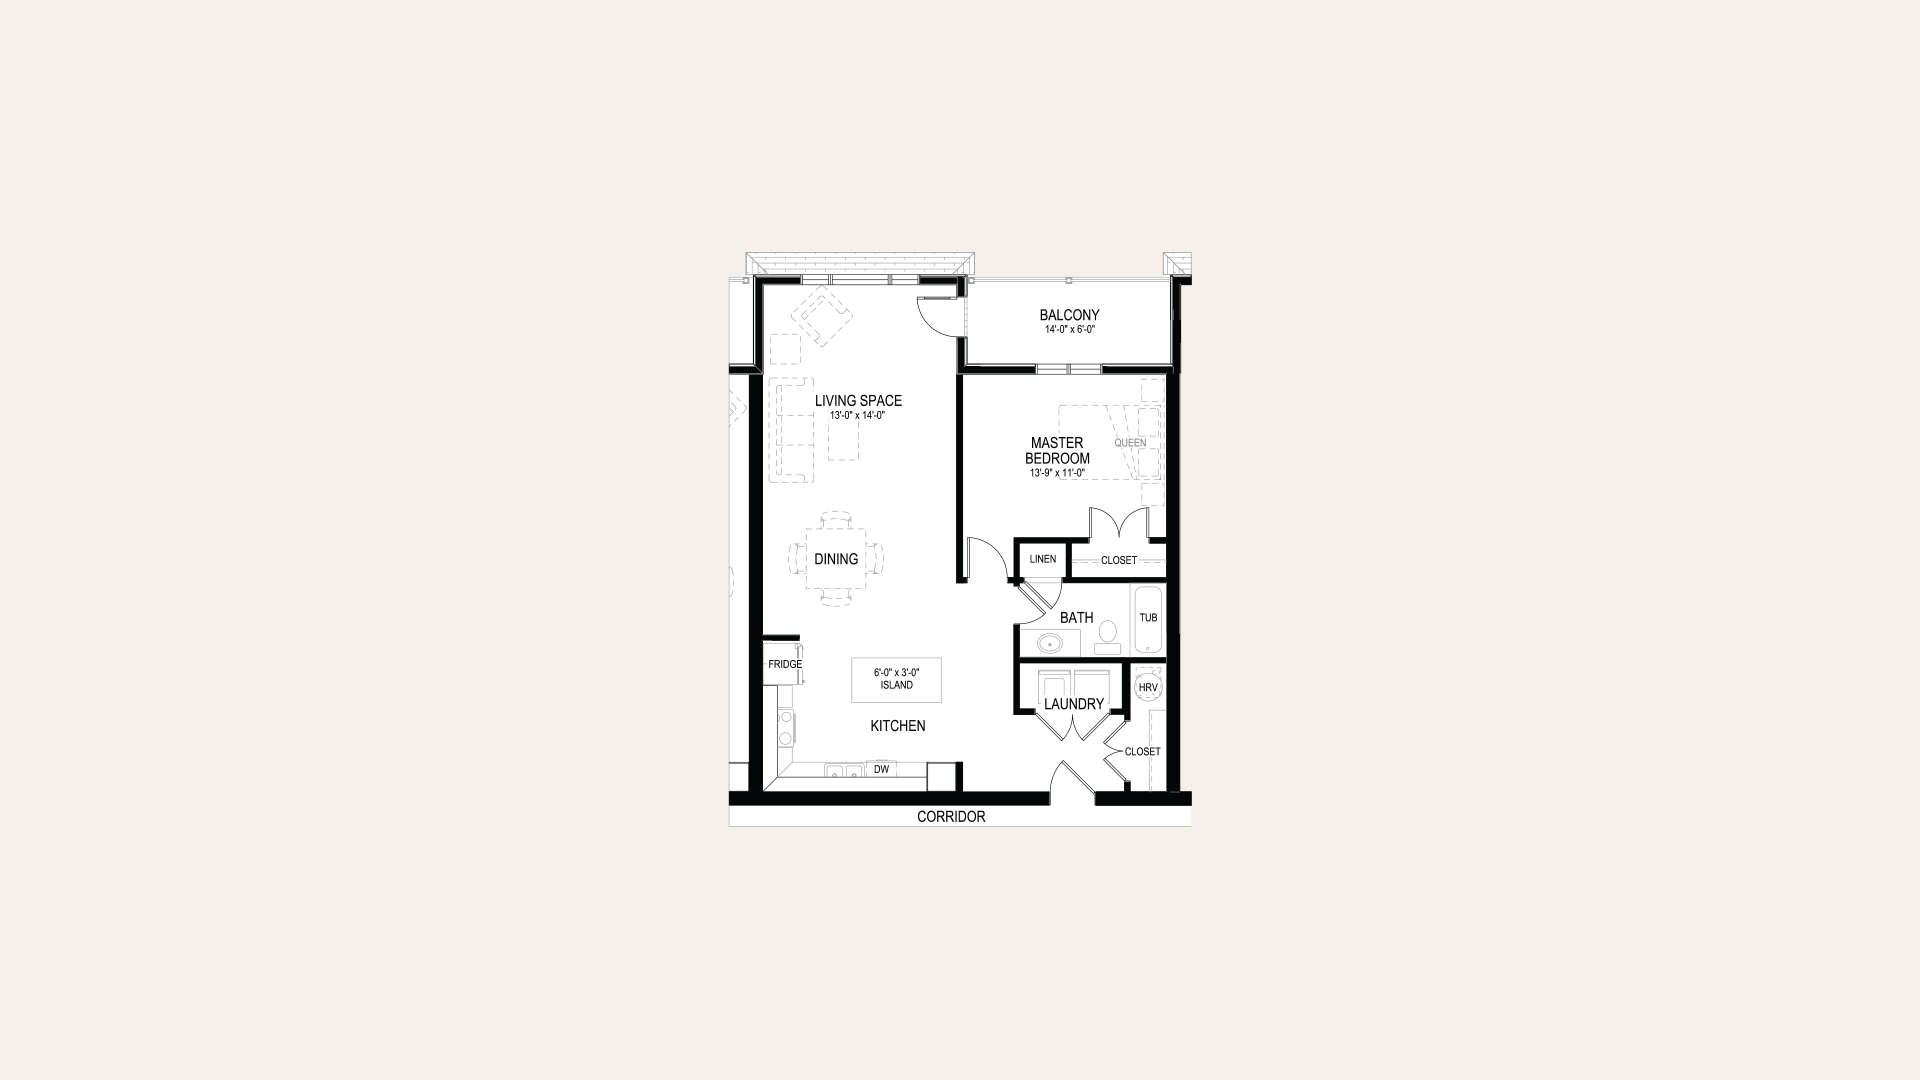 Floor plan of apartment D1 in Building A. One bedroom, one bathroom, laundry closet, balcony, and an open concept kitchen and living room.